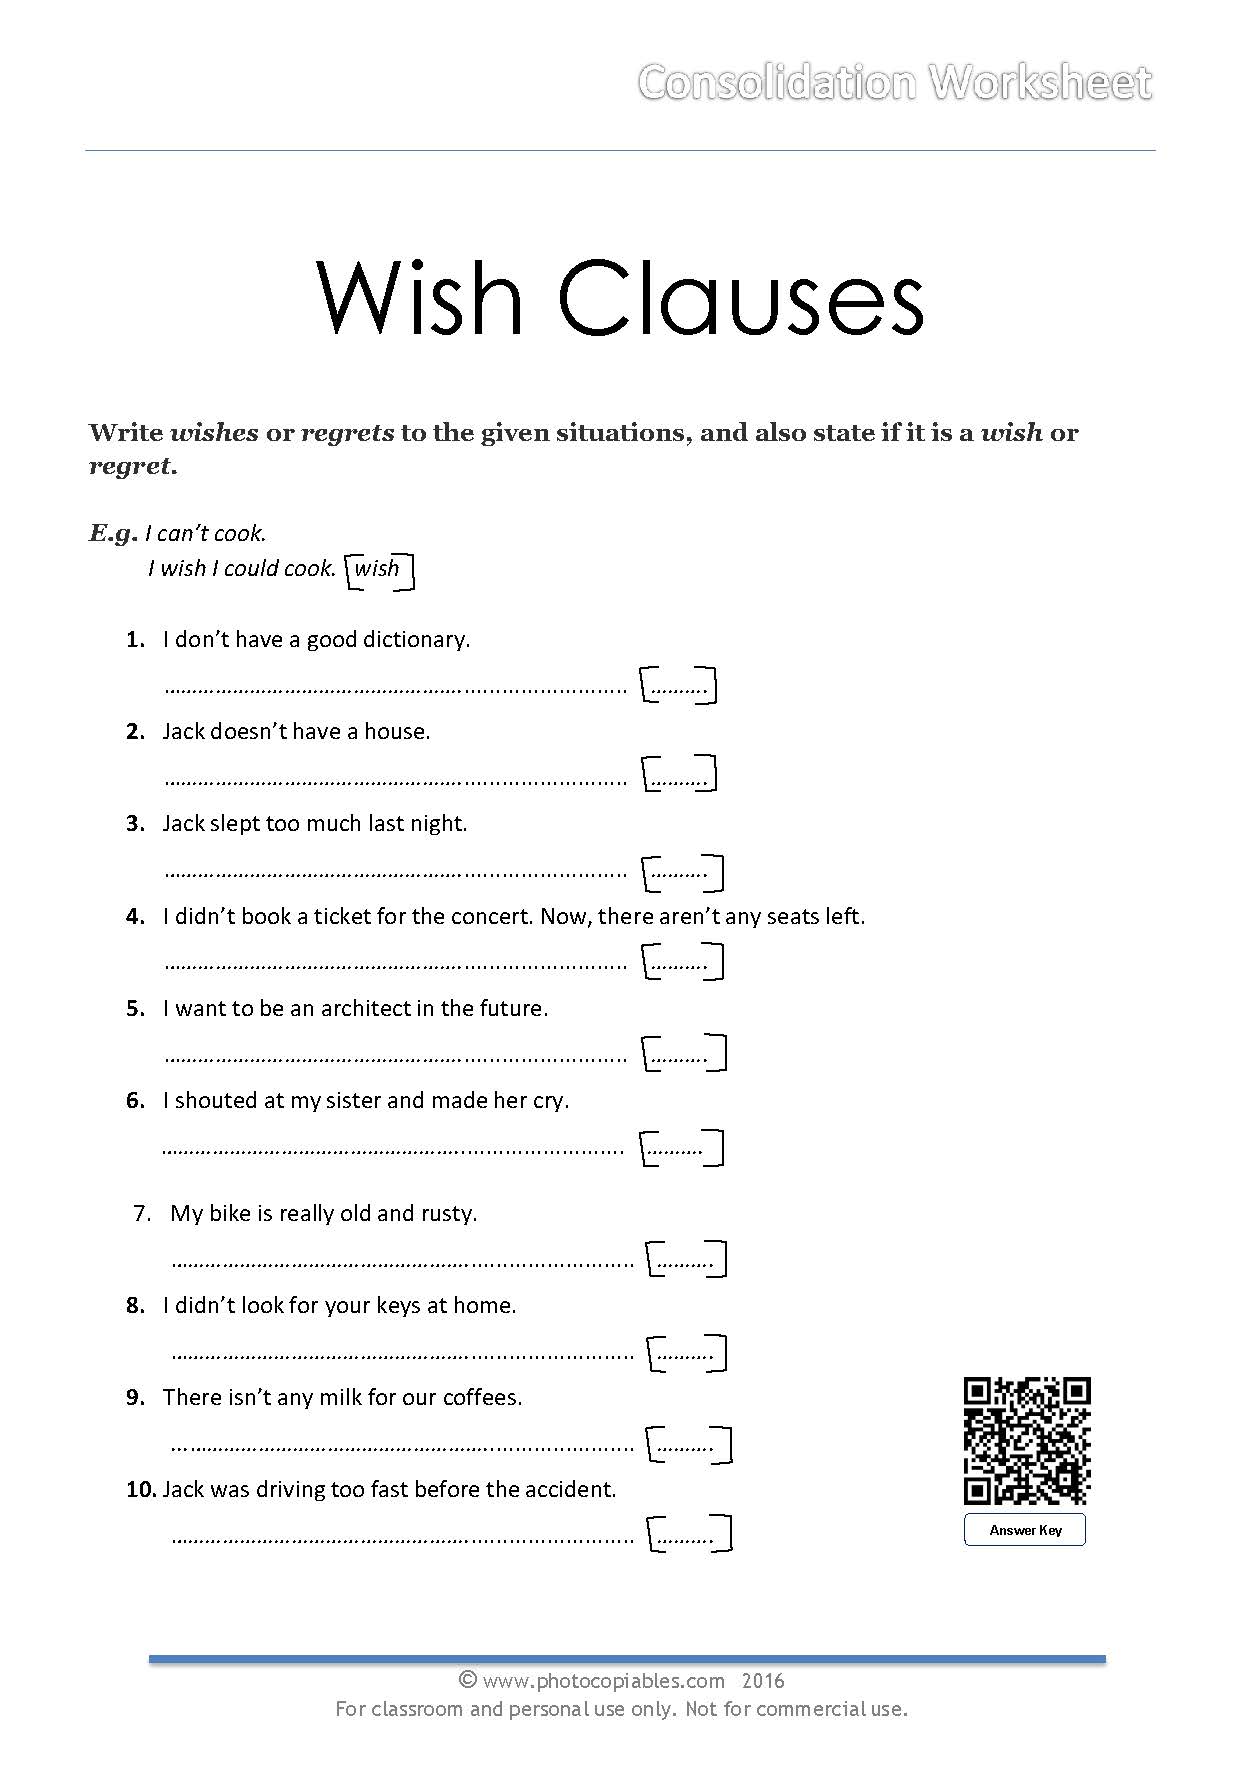 wish-clauses-worksheet-photocopiables